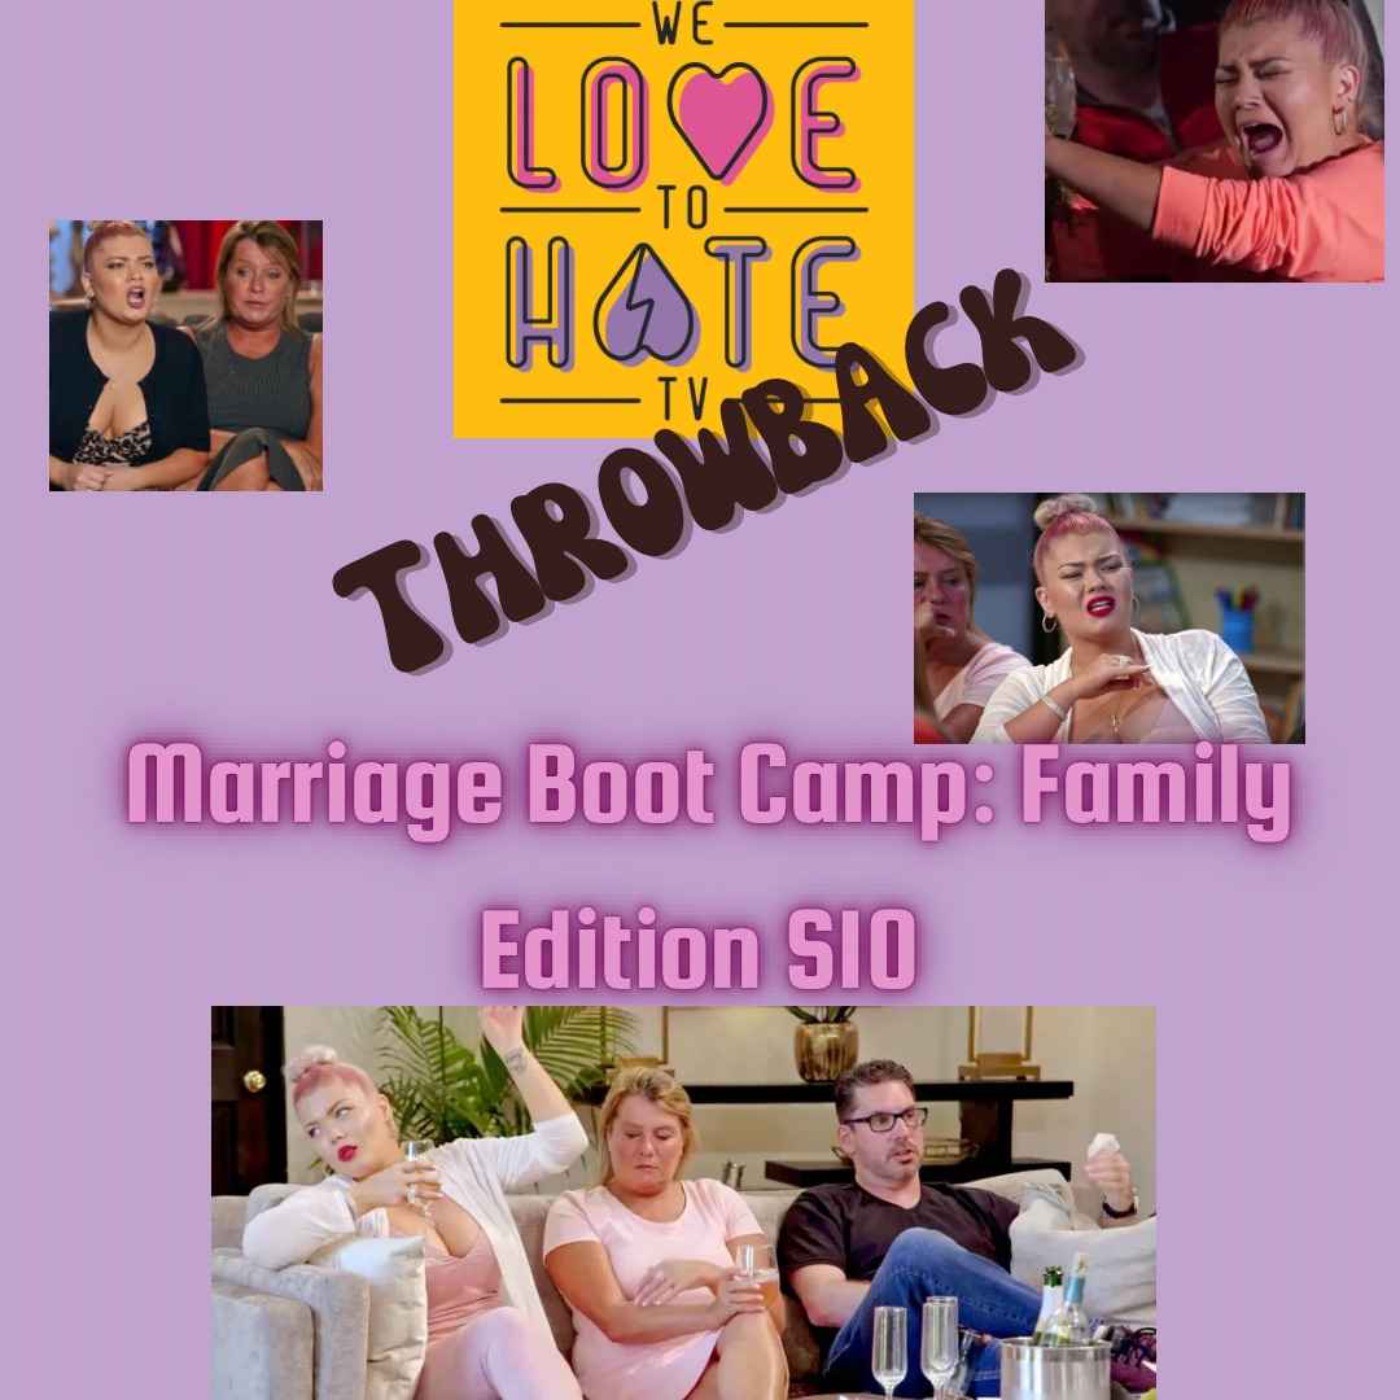 Marriage Bootcamp: Family Edition S10 E1 